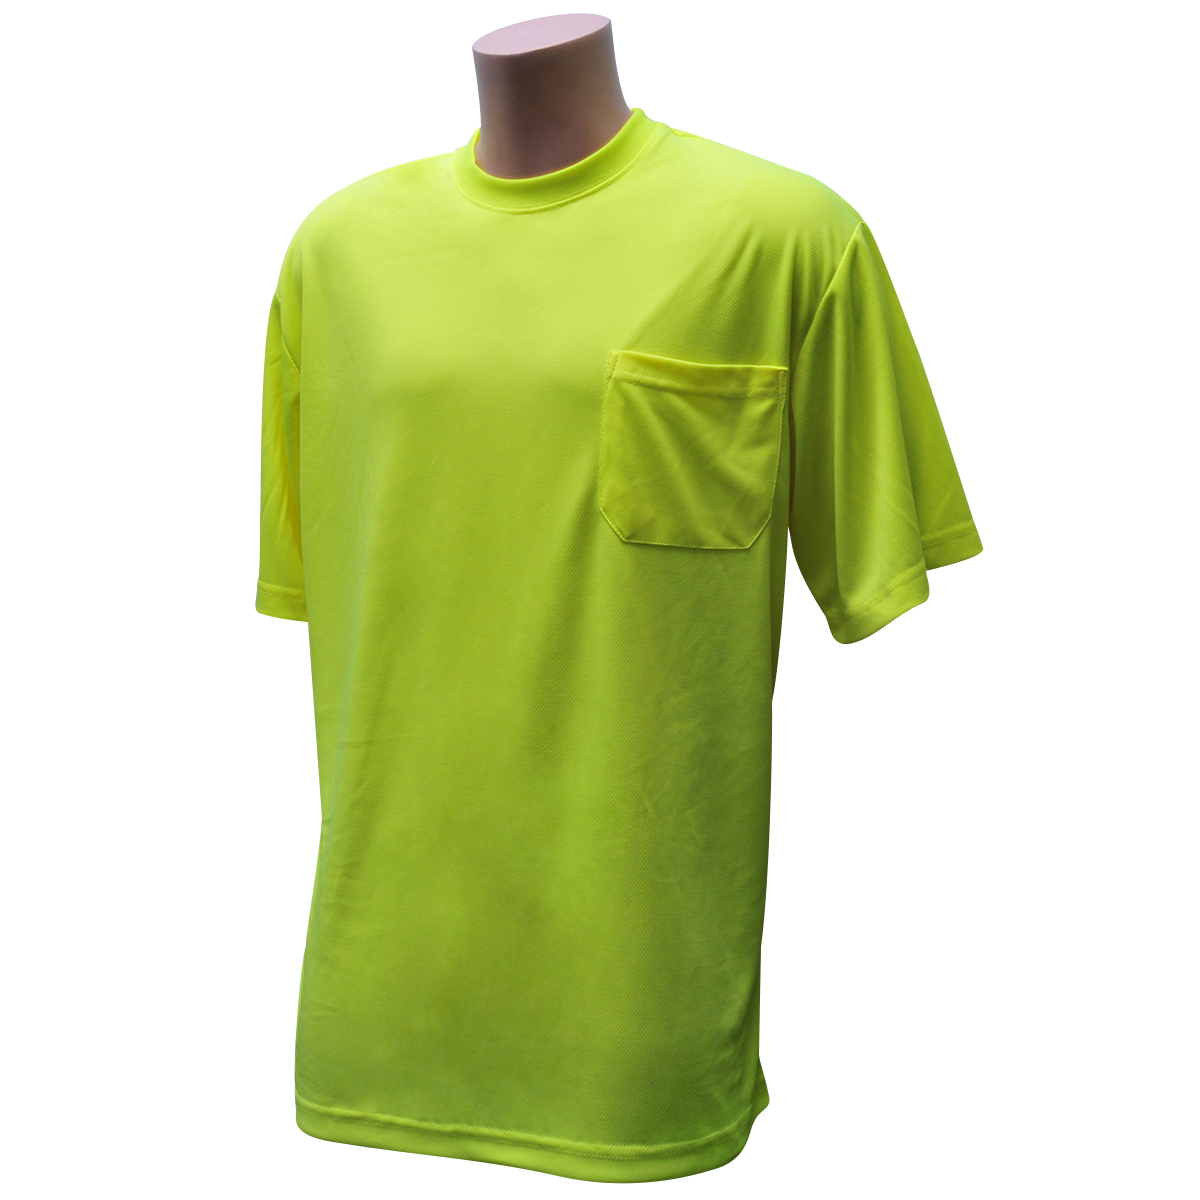 BlackCanyon Outfitters Non Rated Short Sleeve Pocket T-Shirt Lime Green BCOSSTY3X Brightly Colored Shirt Fast-Dry Fabric 3X